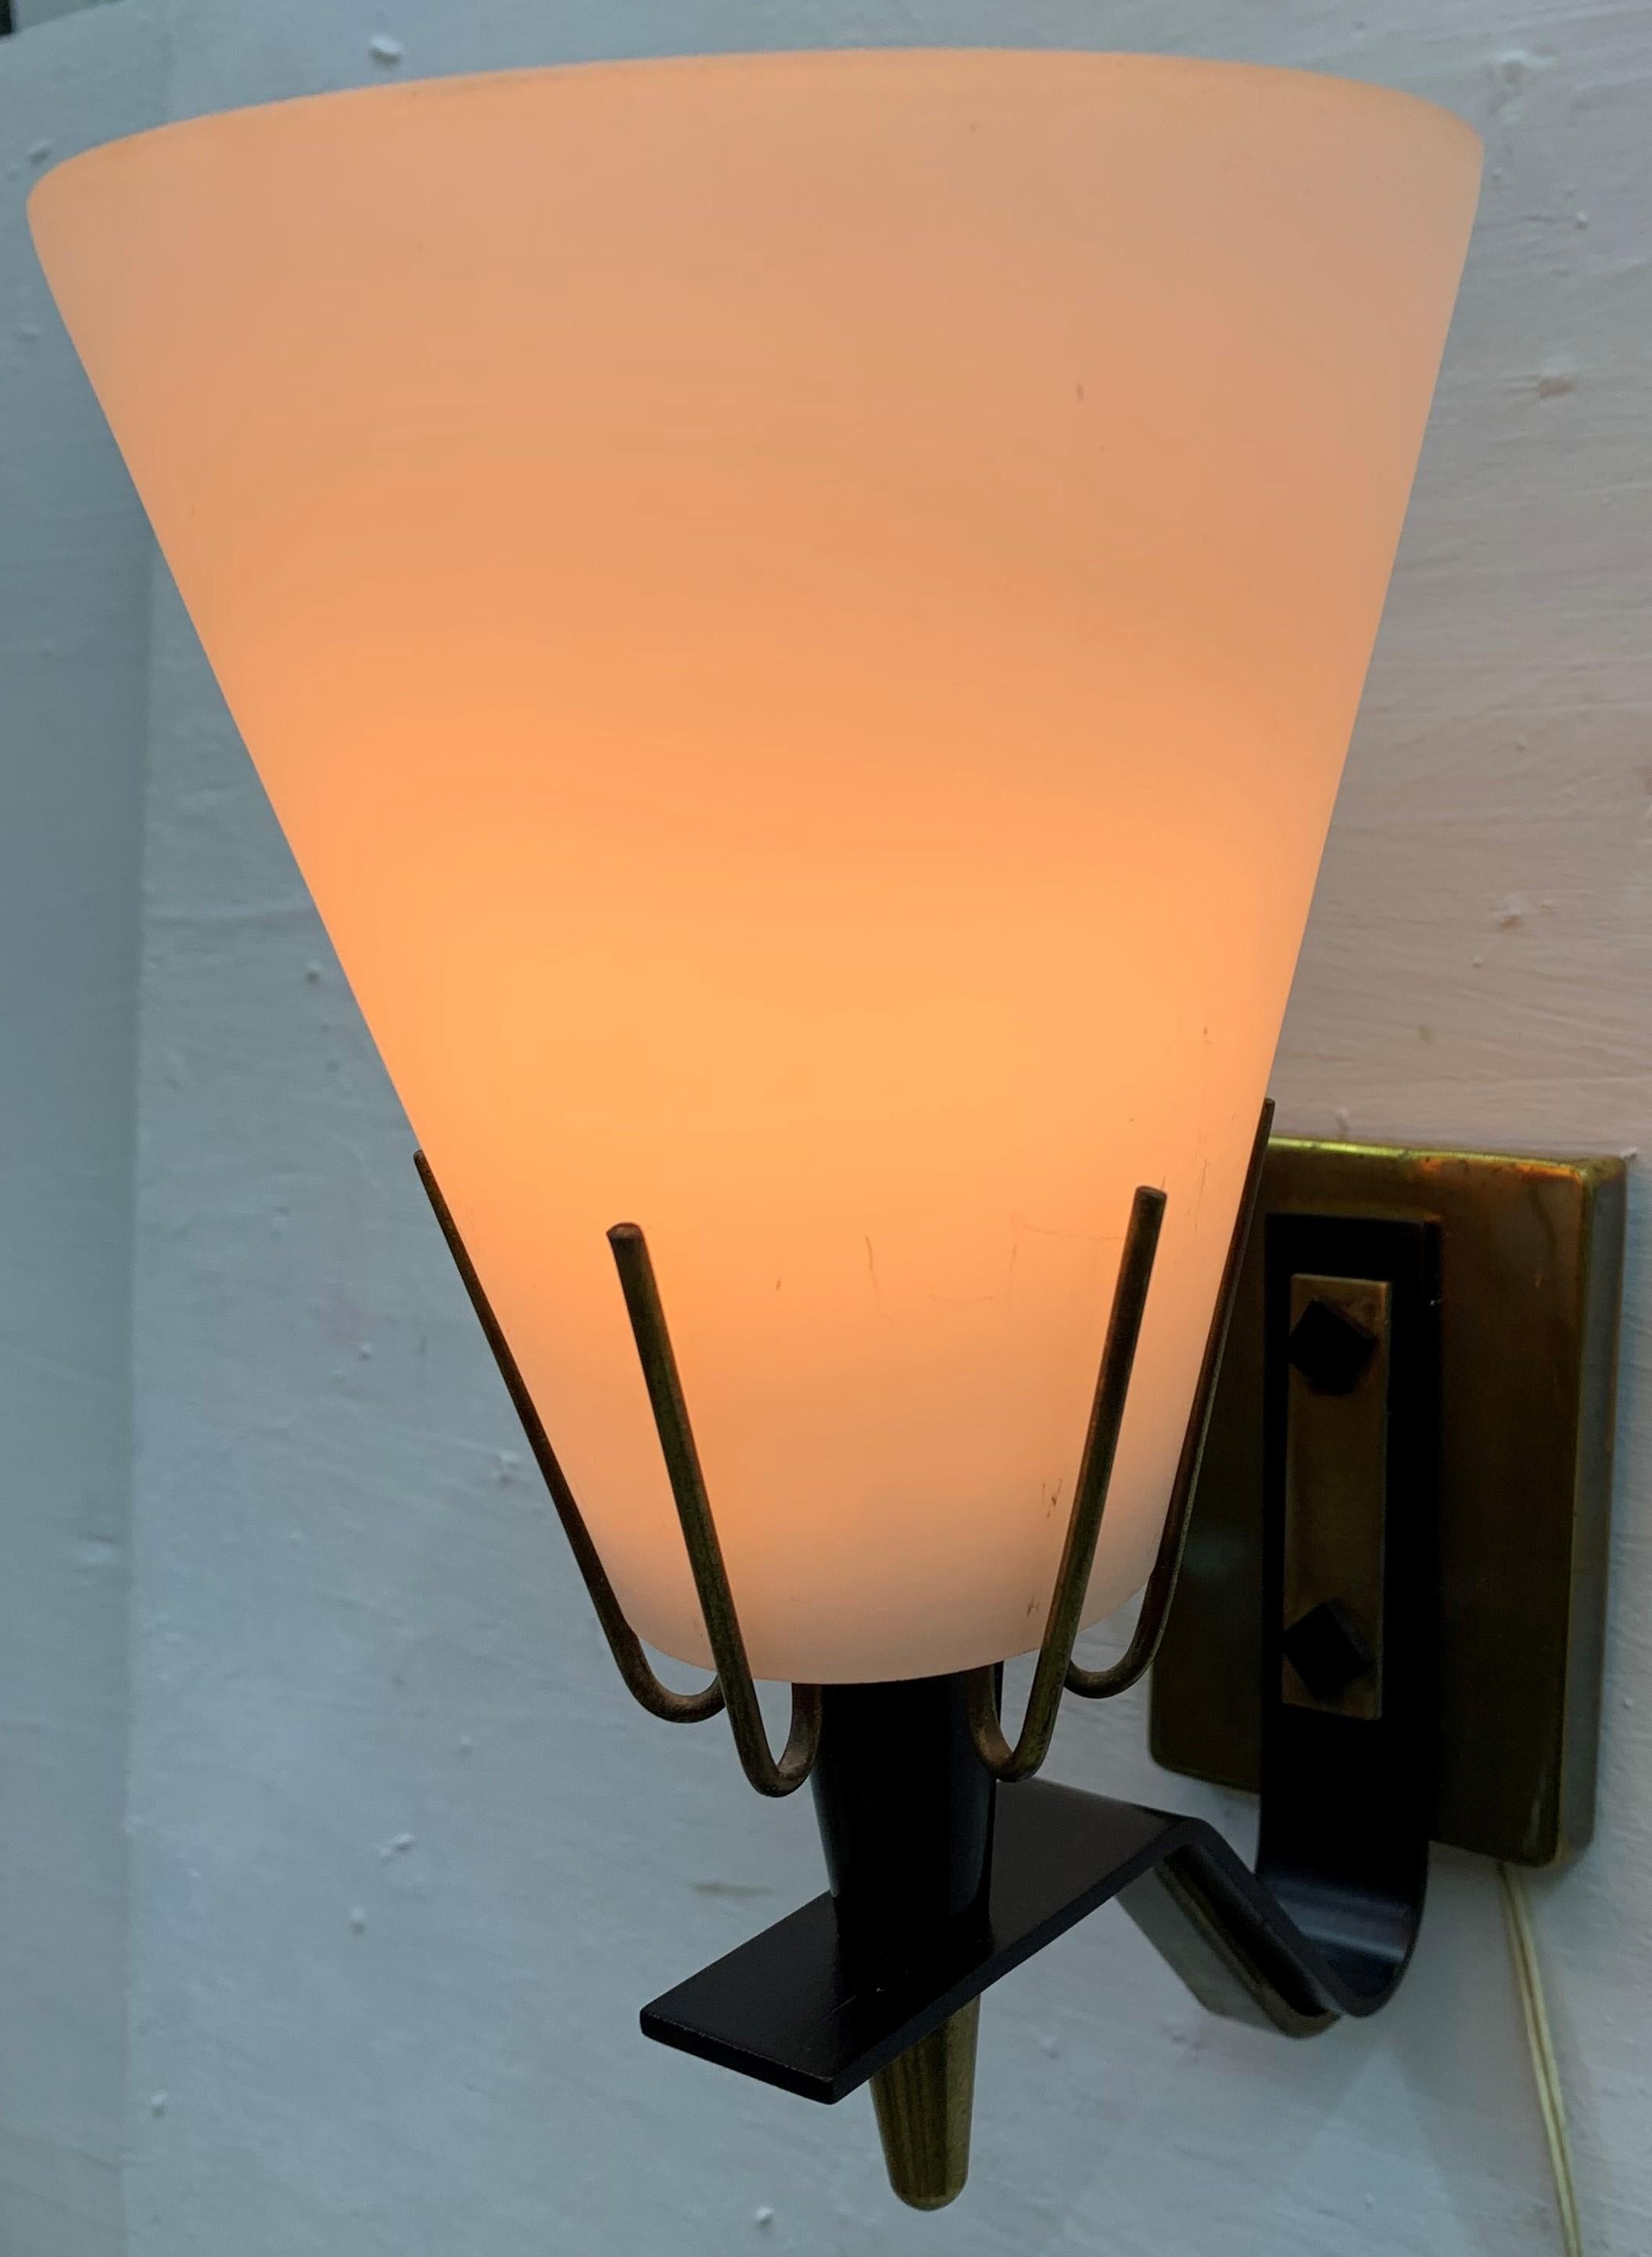 Stainless Steel Mid-Century Modern Sconce Attributed to Stilnovo, Italy, circa 1950 For Sale